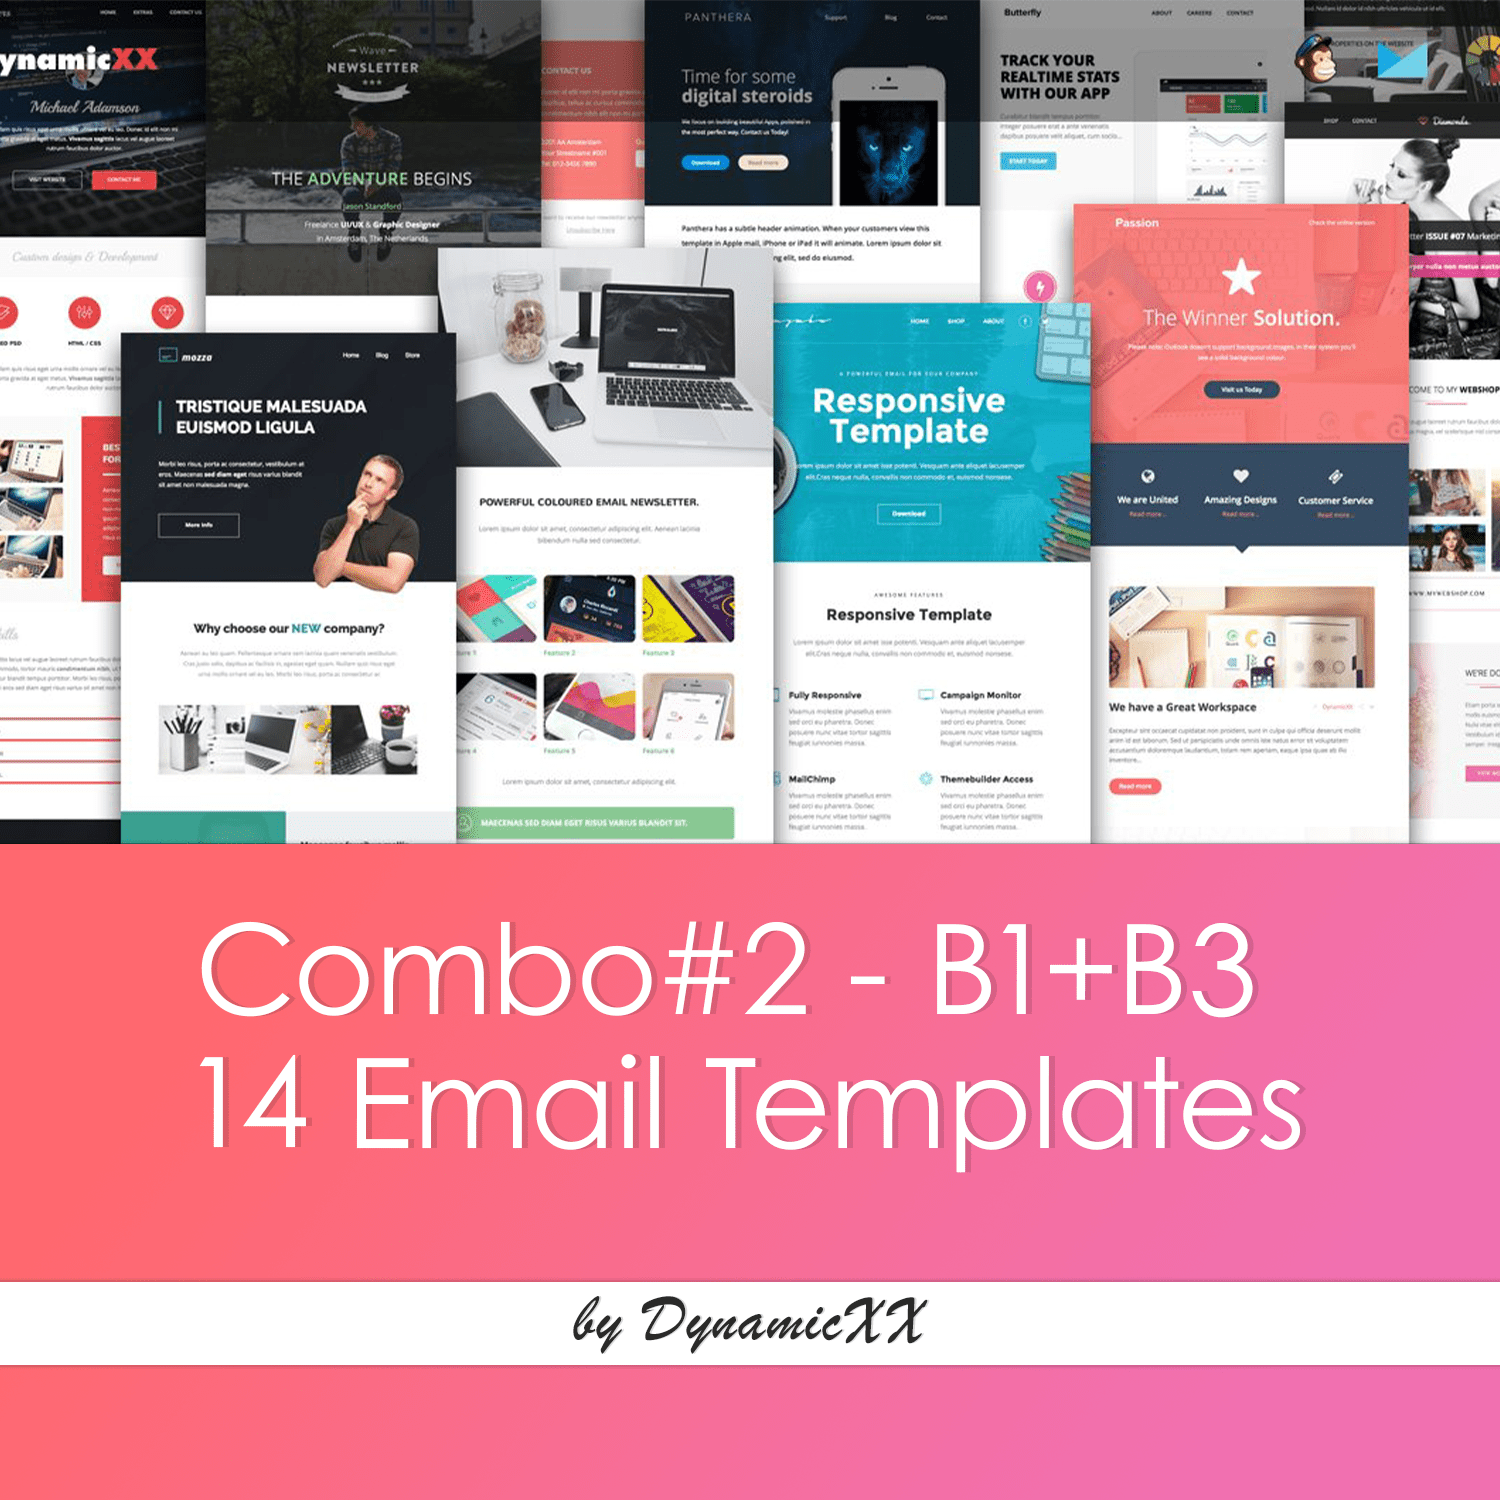 Pack of images of adorable adorable email design templates.